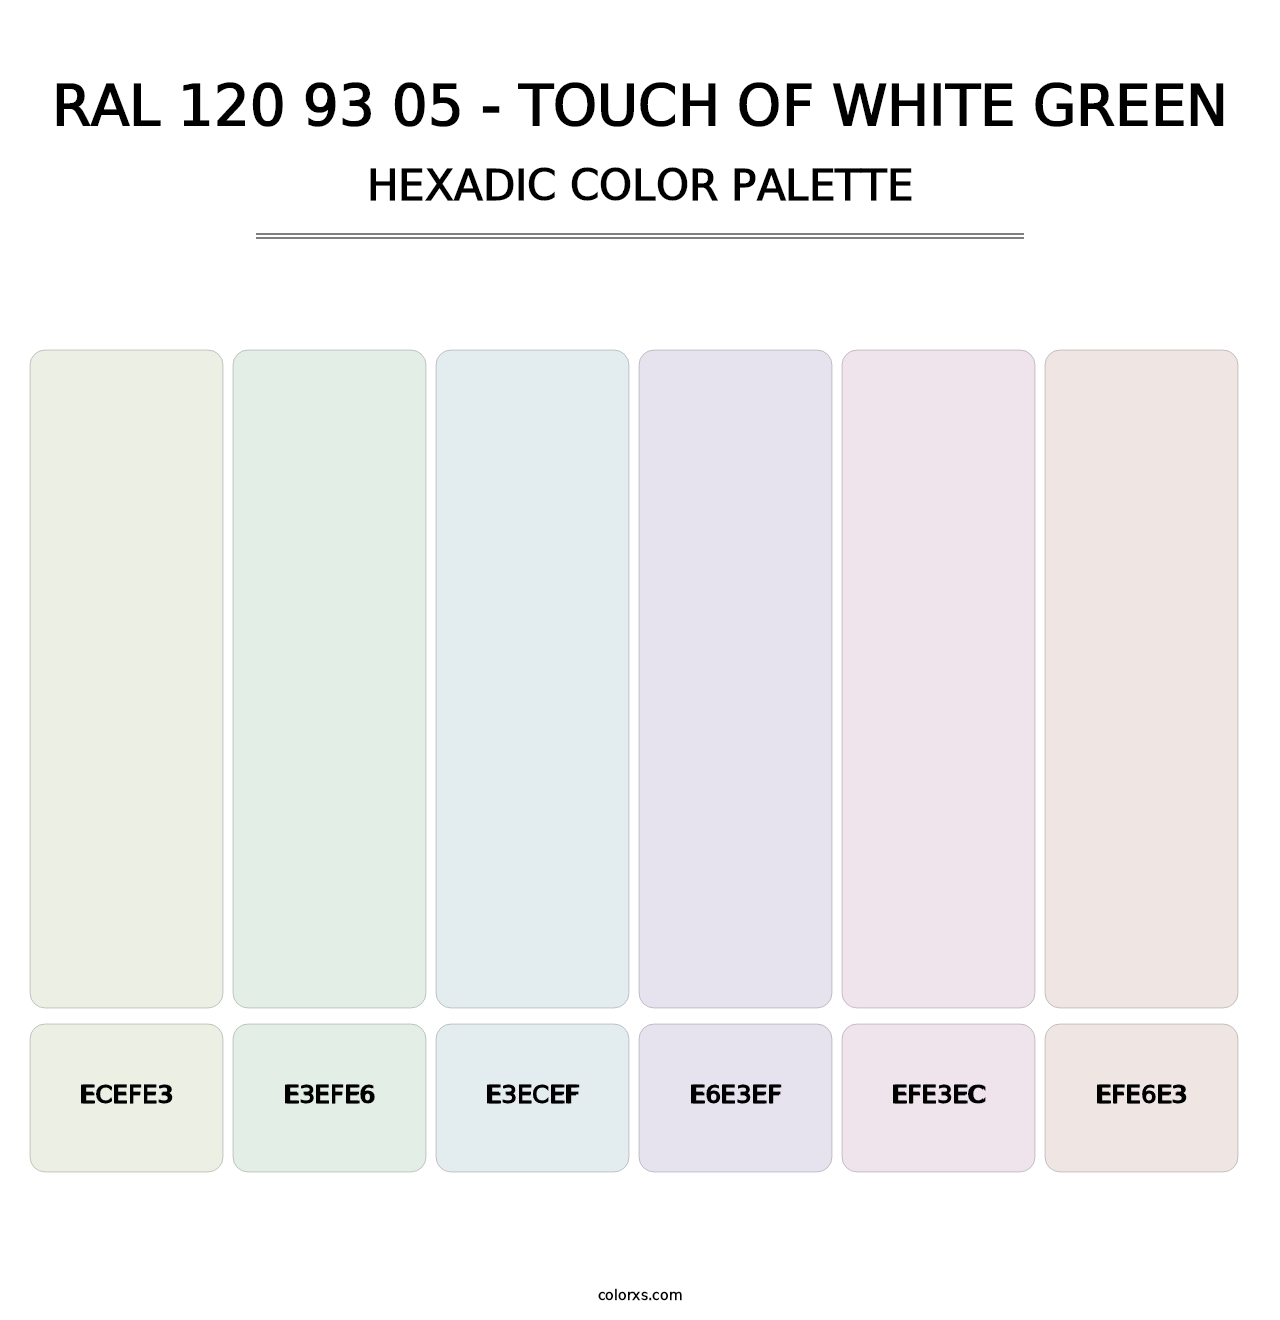 RAL 120 93 05 - Touch Of White Green - Hexadic Color Palette